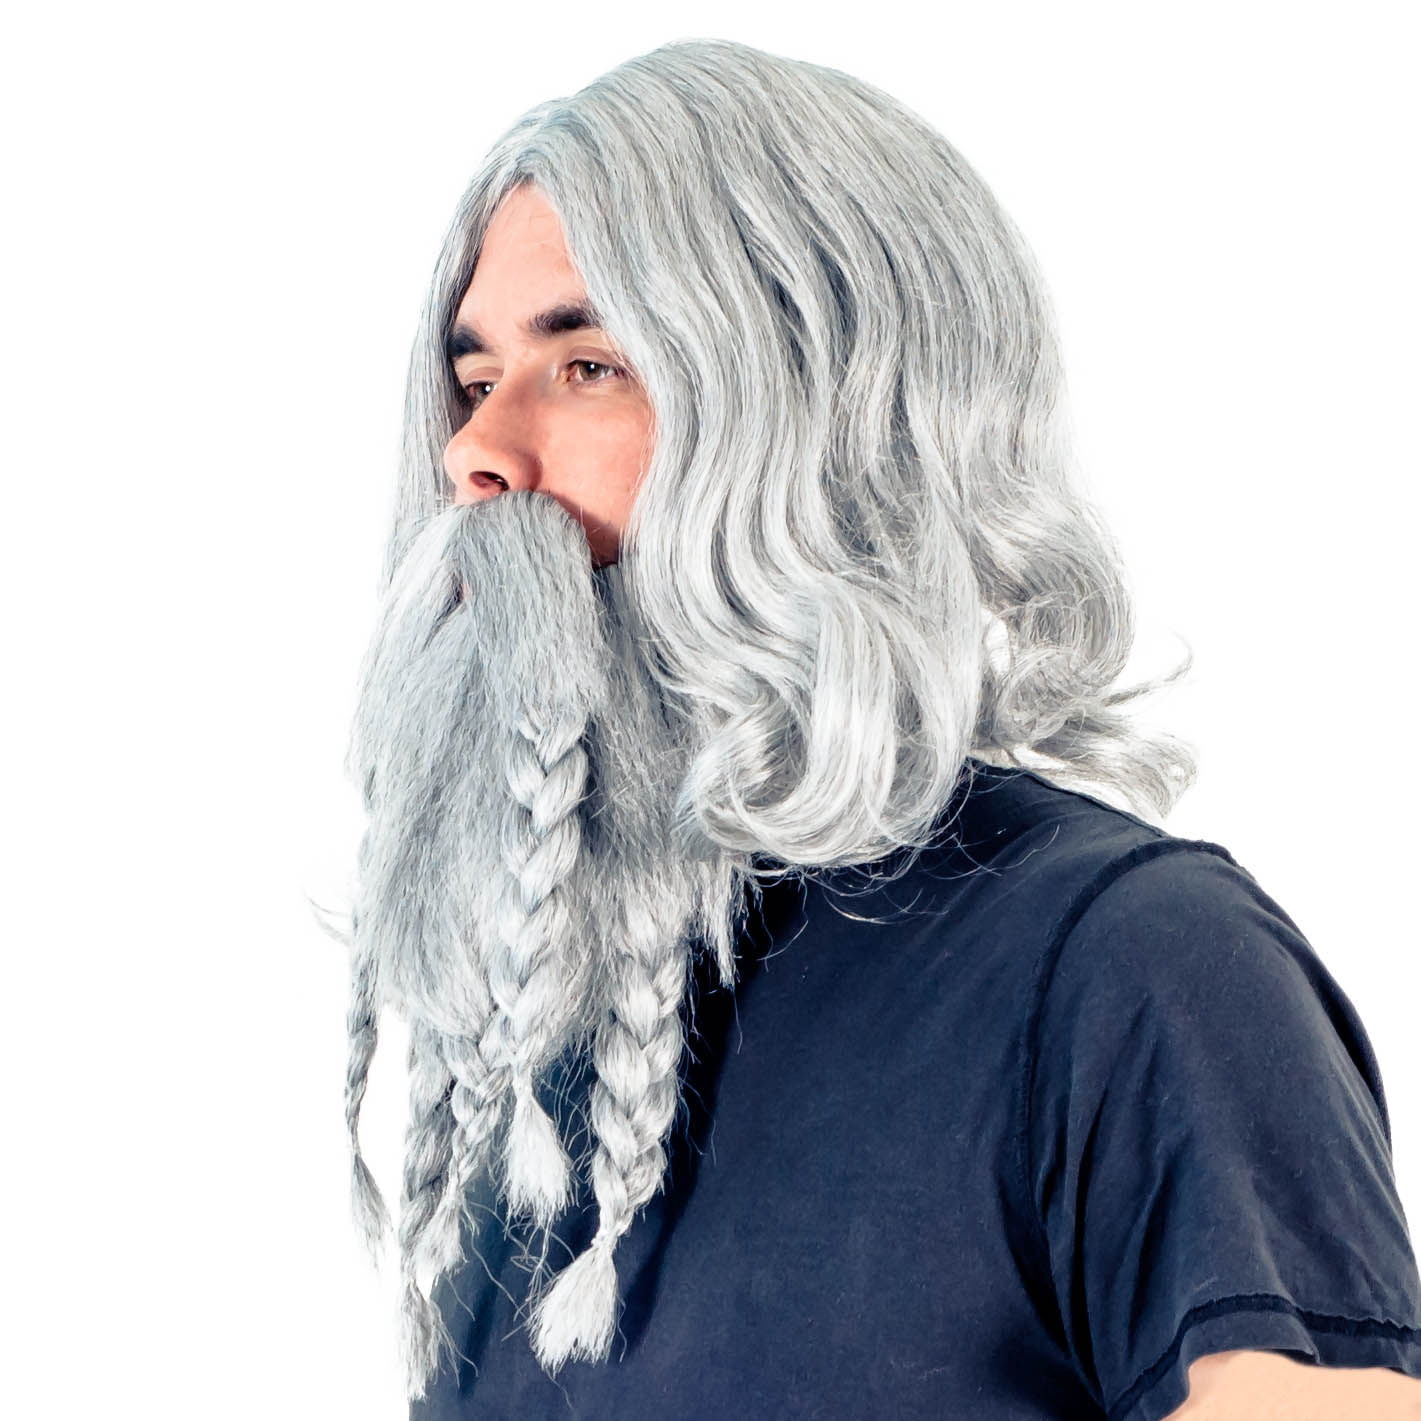 Adult Men's Deluxe Viking Wig and Beard Costume Accessory Set 